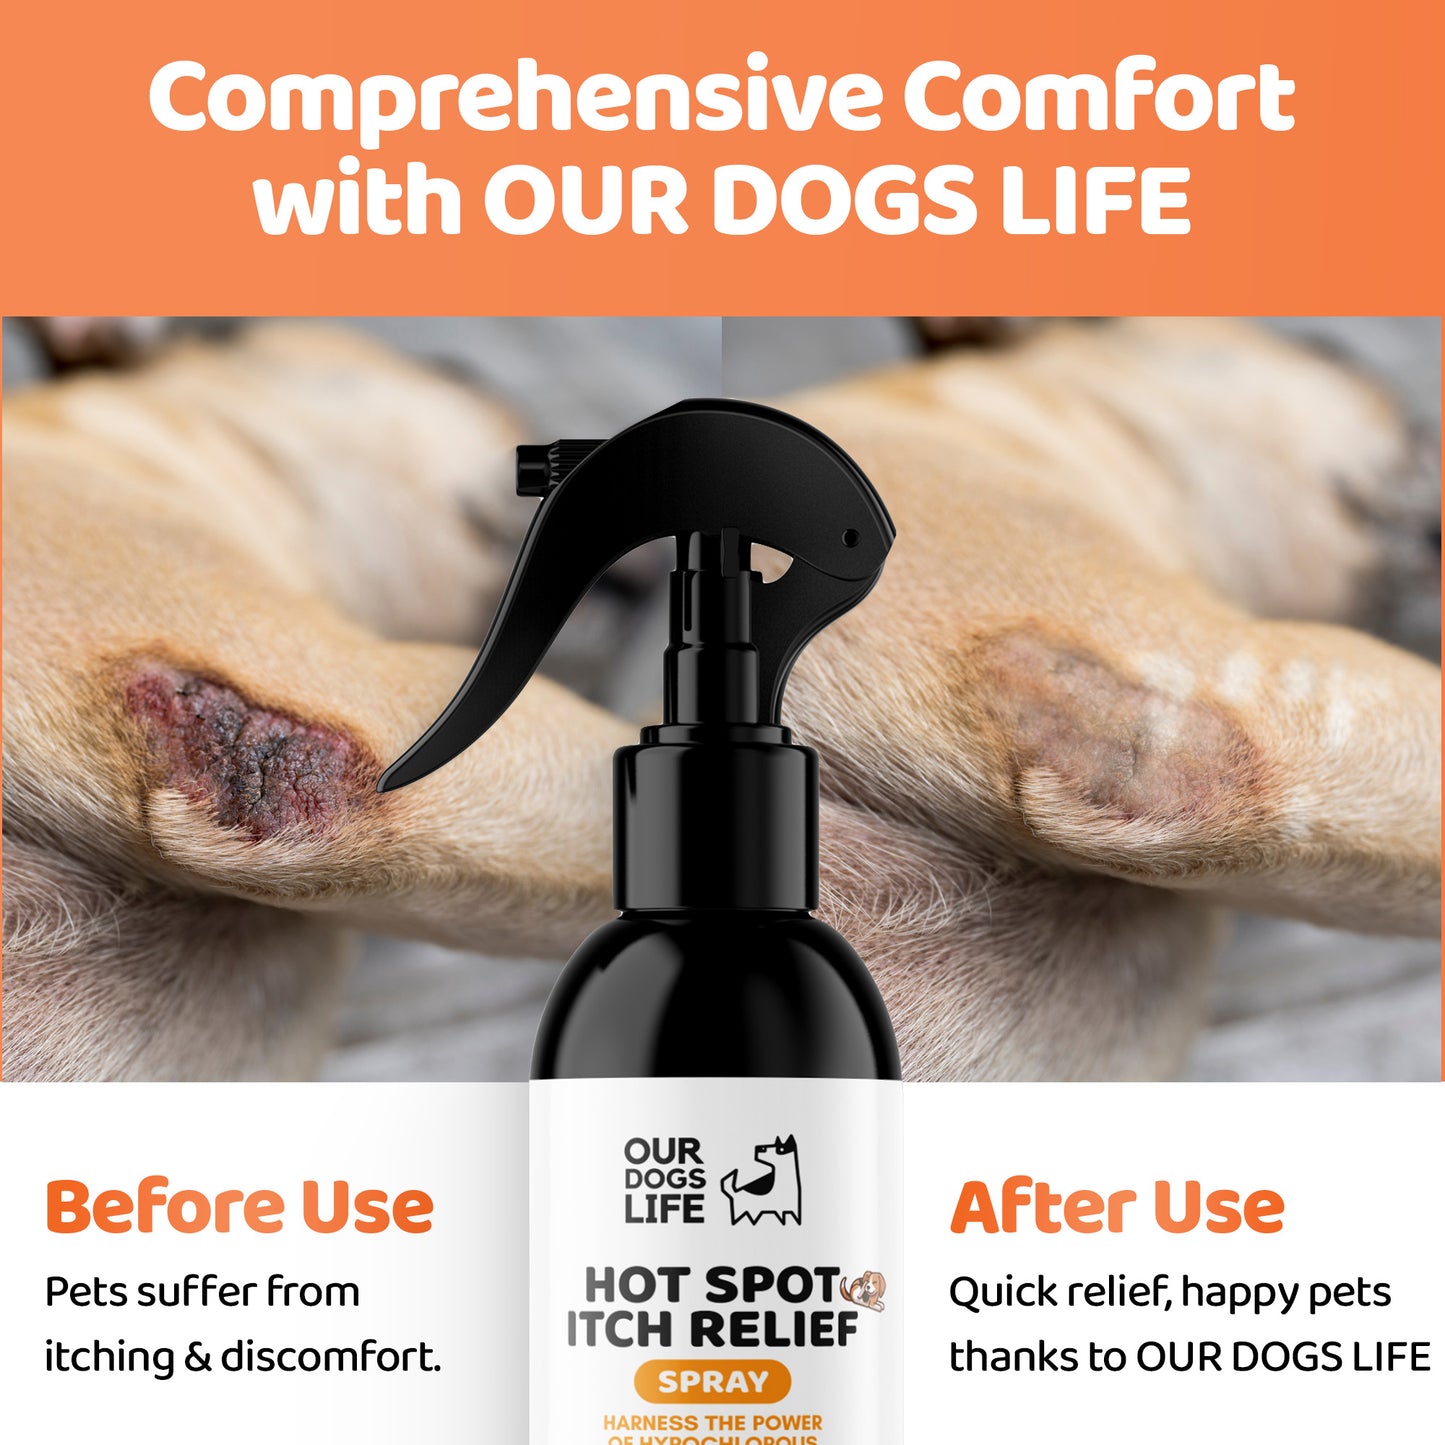 Itch Spray for Dogs